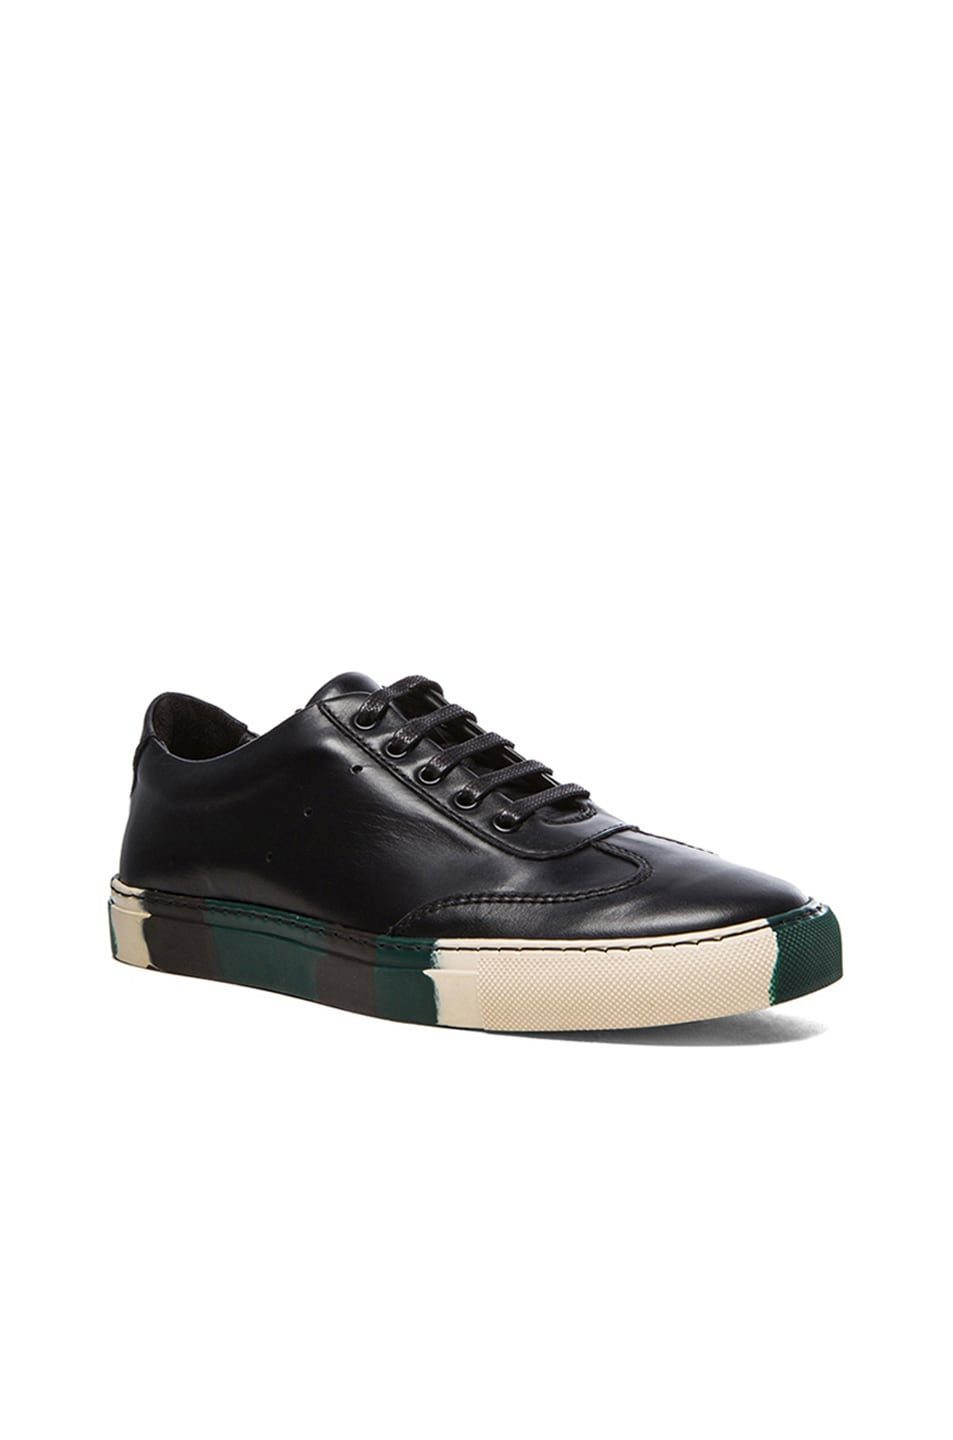 Comme Des Garcons SHIRT Leather Sneakers with Camouflage Sole in Black \u0026  Green | FWRD